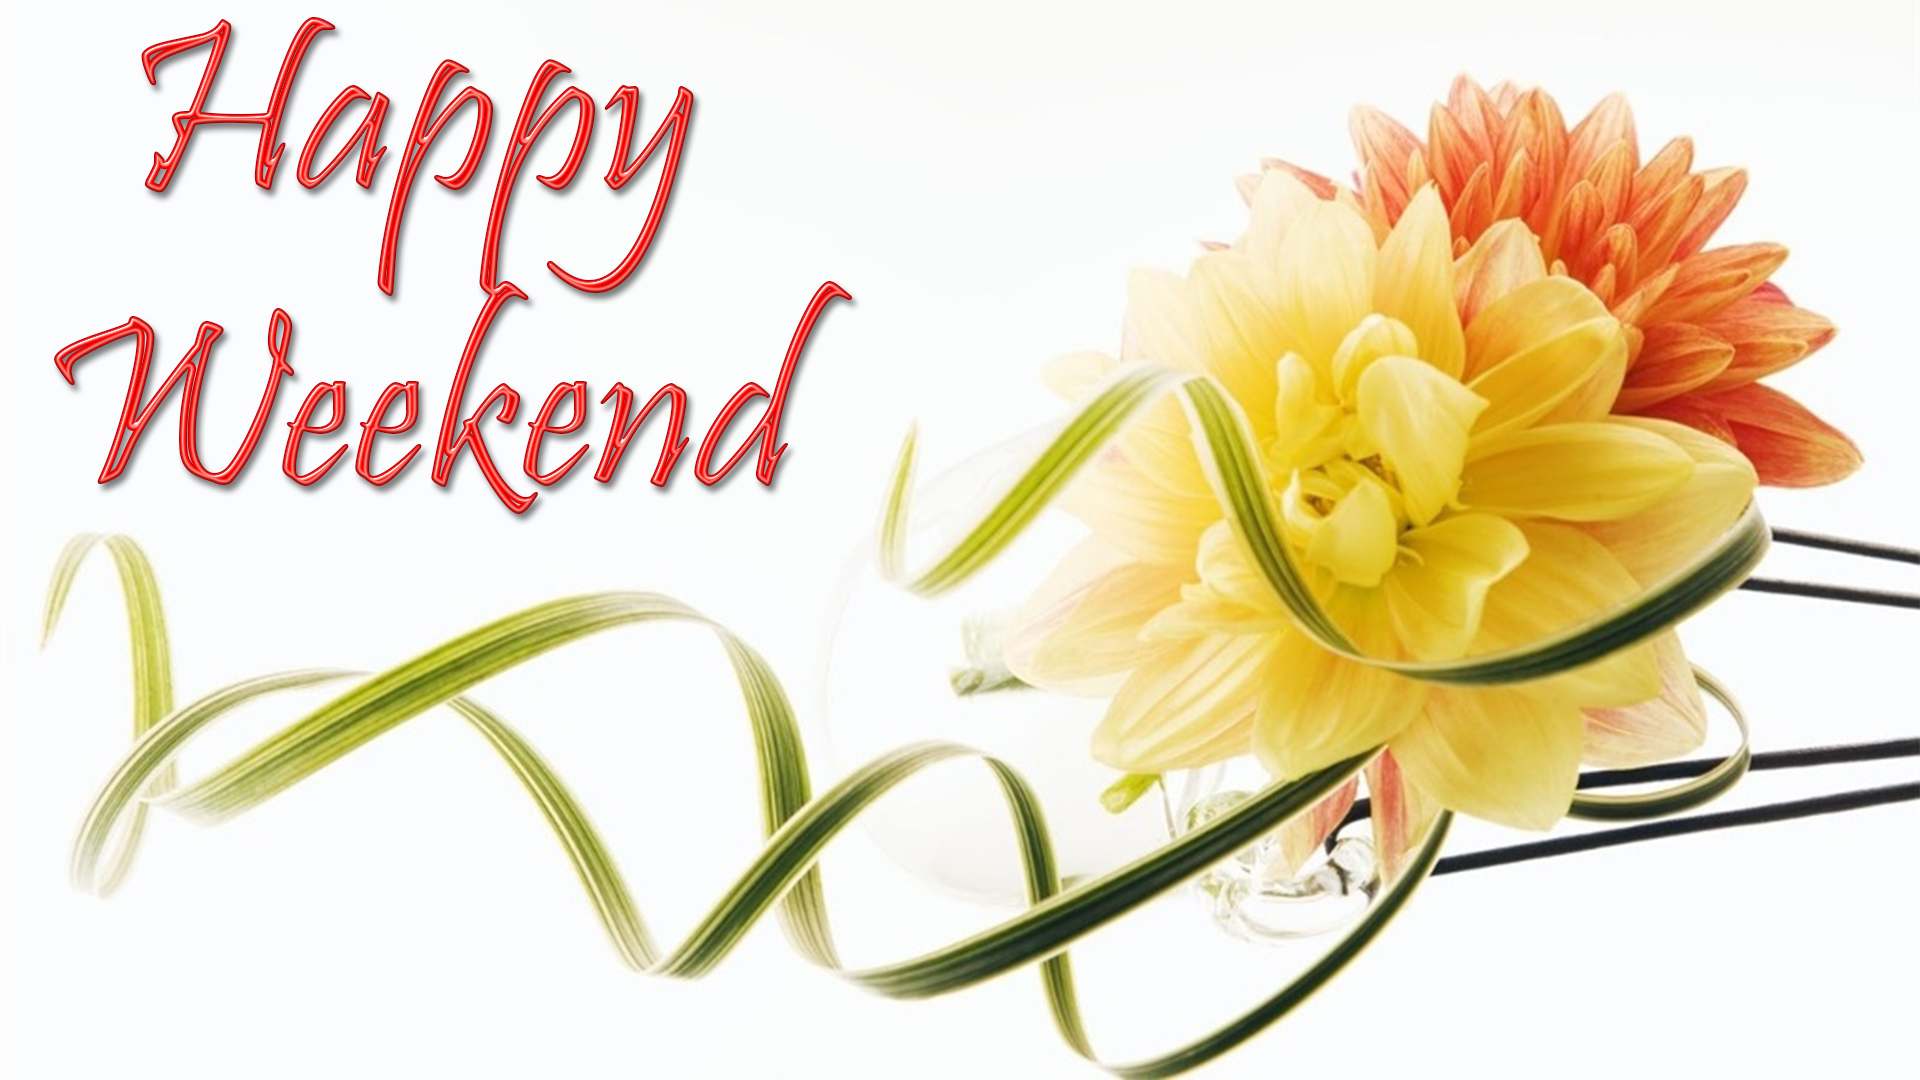 Happy Weekend Image With Beautiful Wishes. Have a Nice Weekend